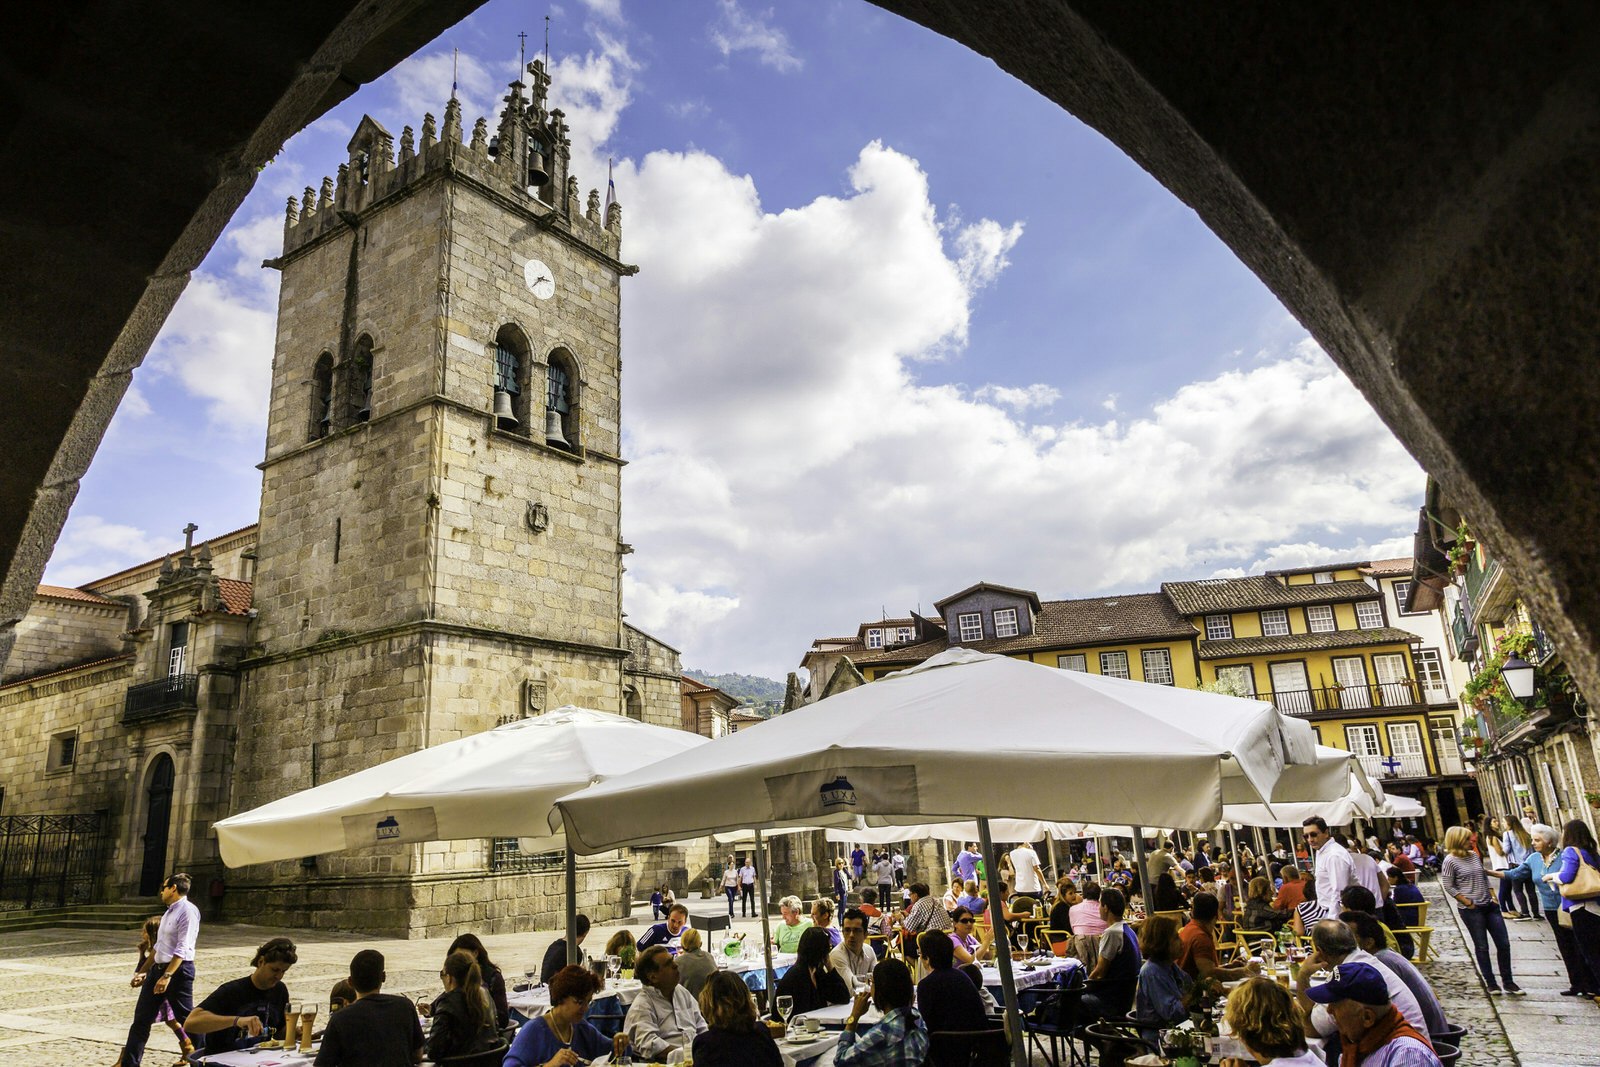 An archway view of Guimarães city square, with outdoor restaurants and tourists seen socialising; a large church rises in one corner of the square. 